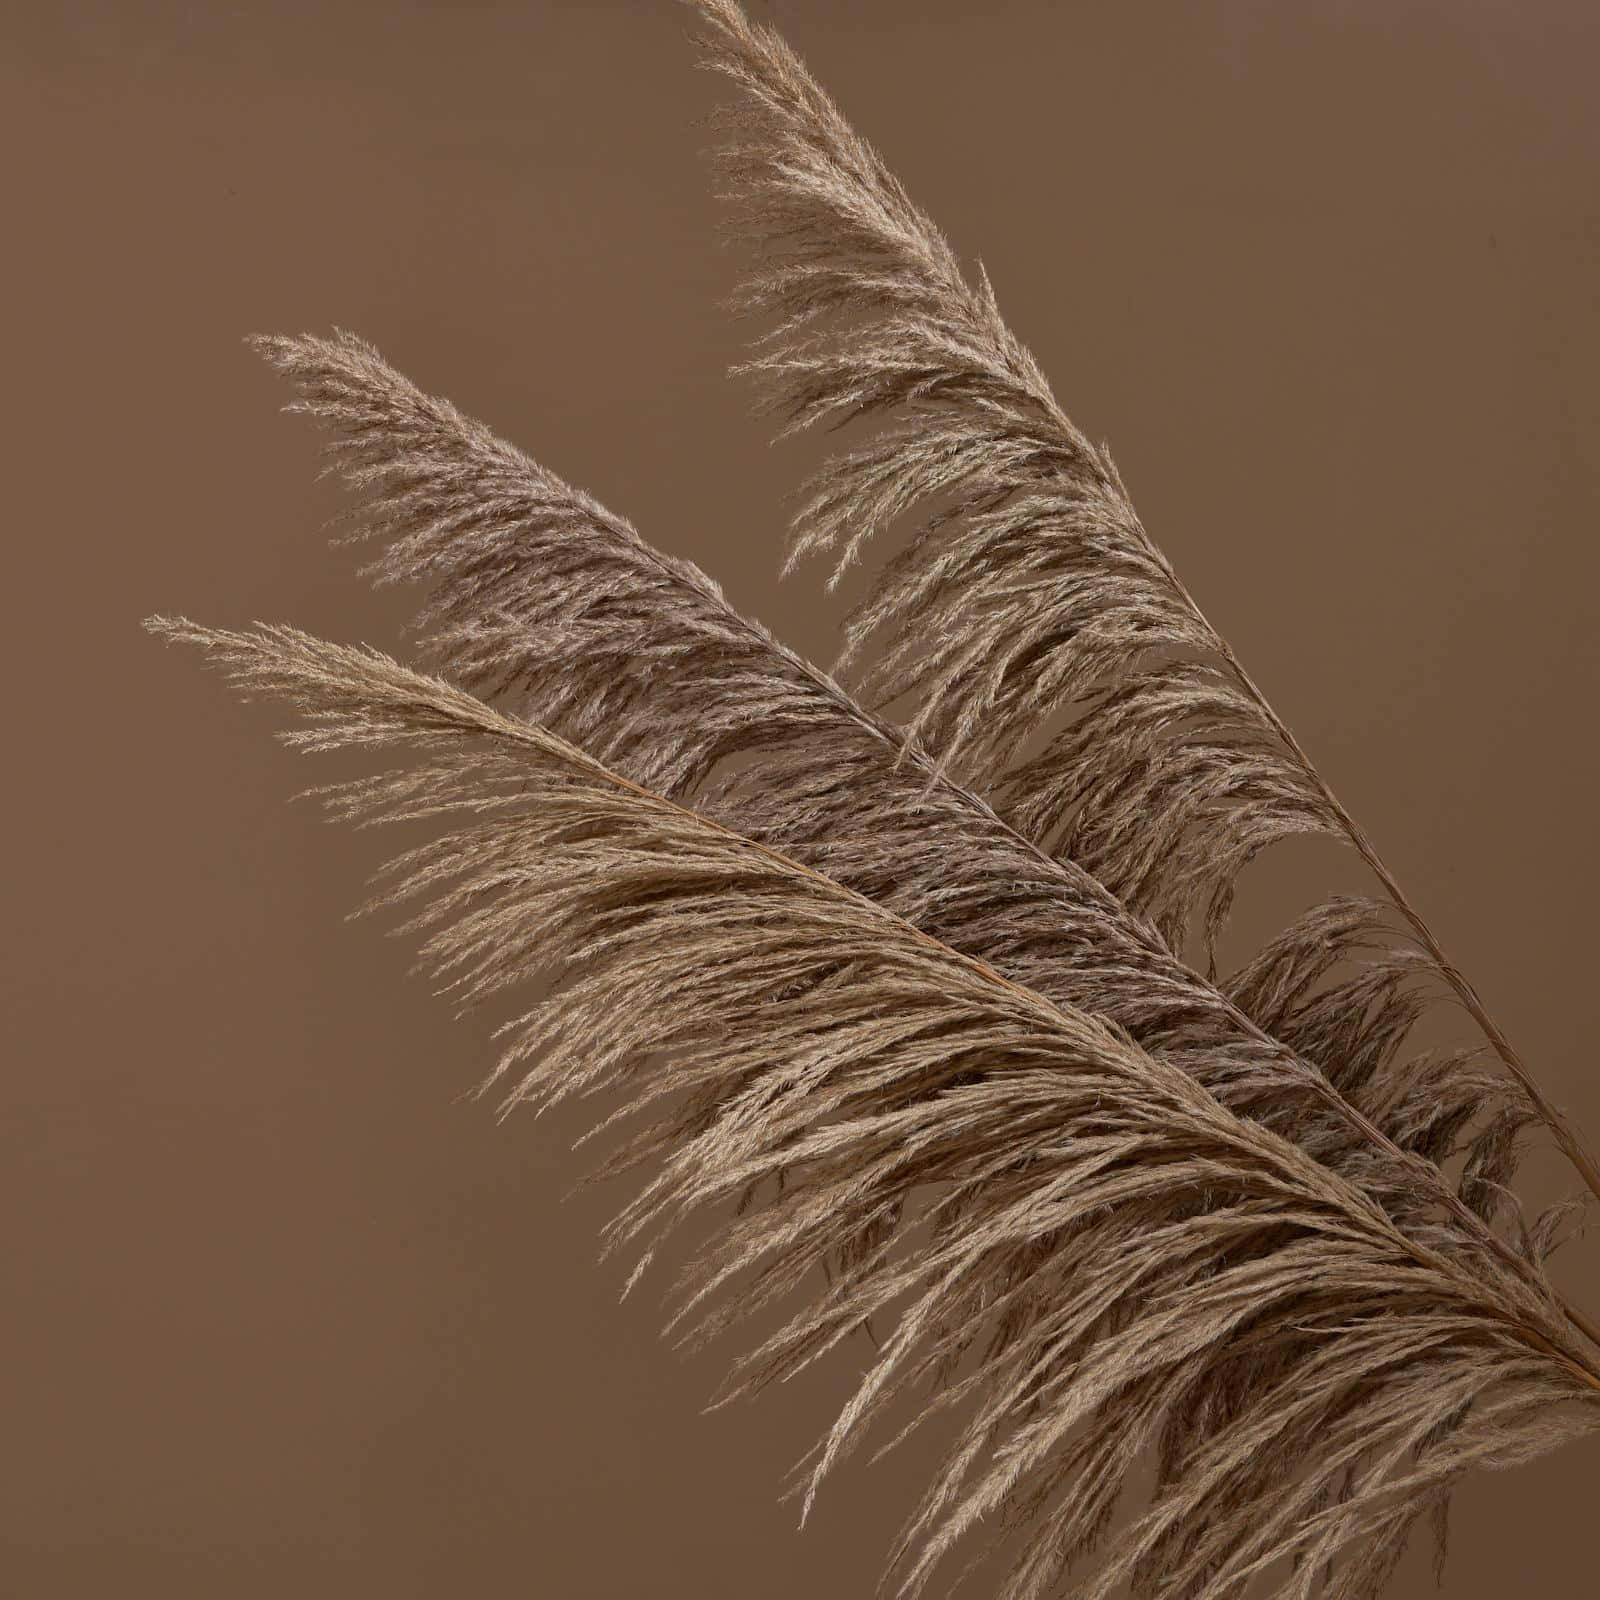 Focused Dried Pampas Grass Background